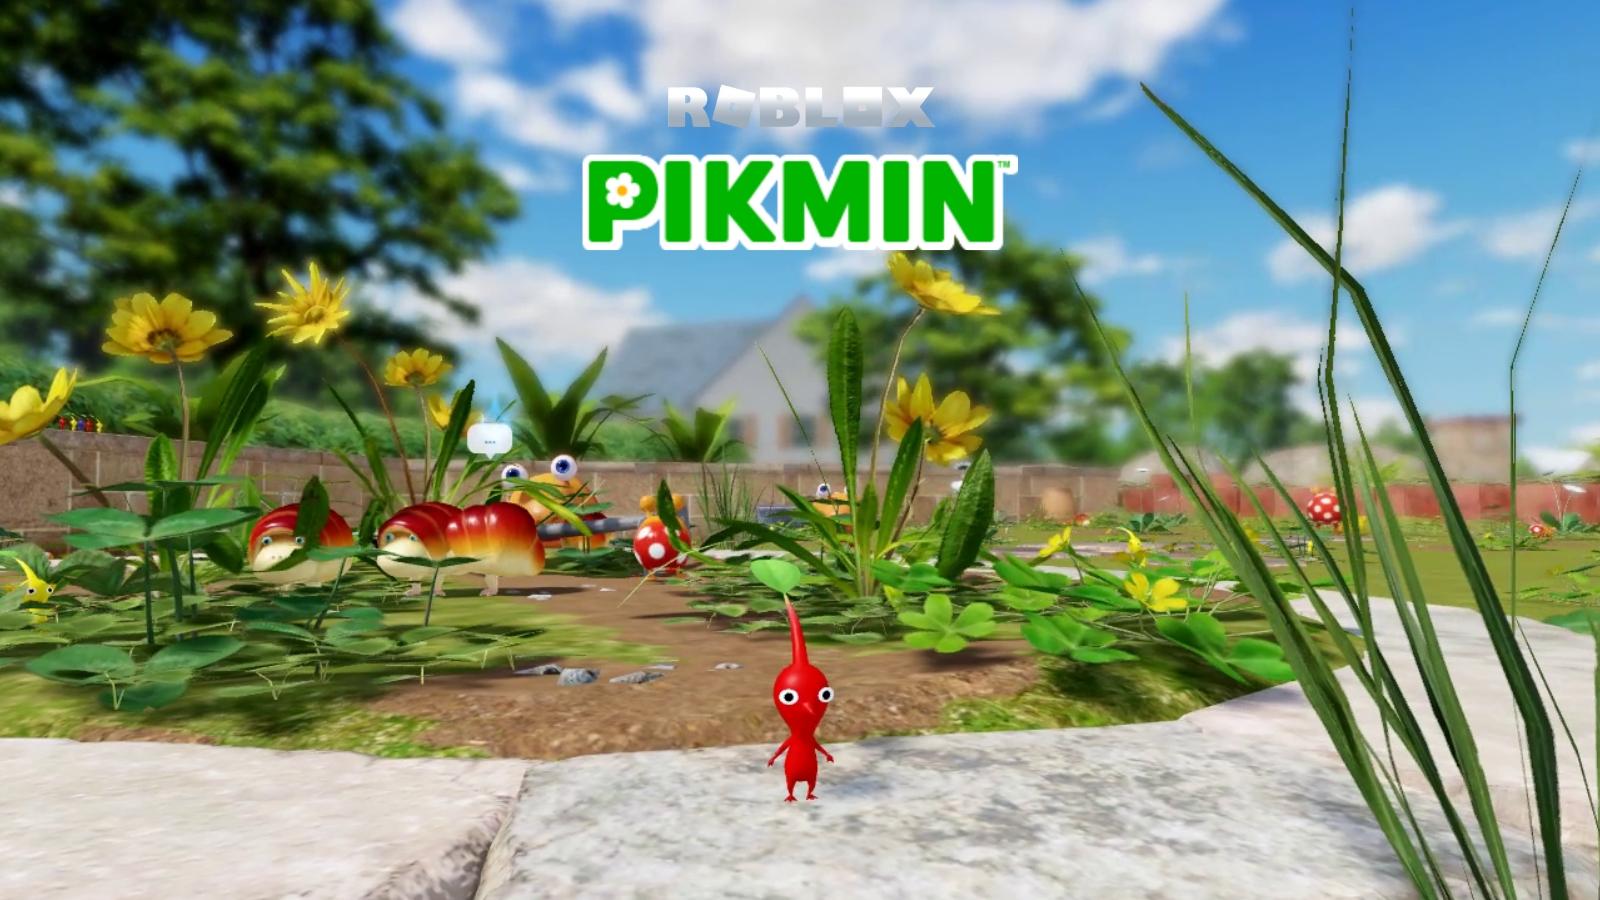 Roblox Pikmin cover